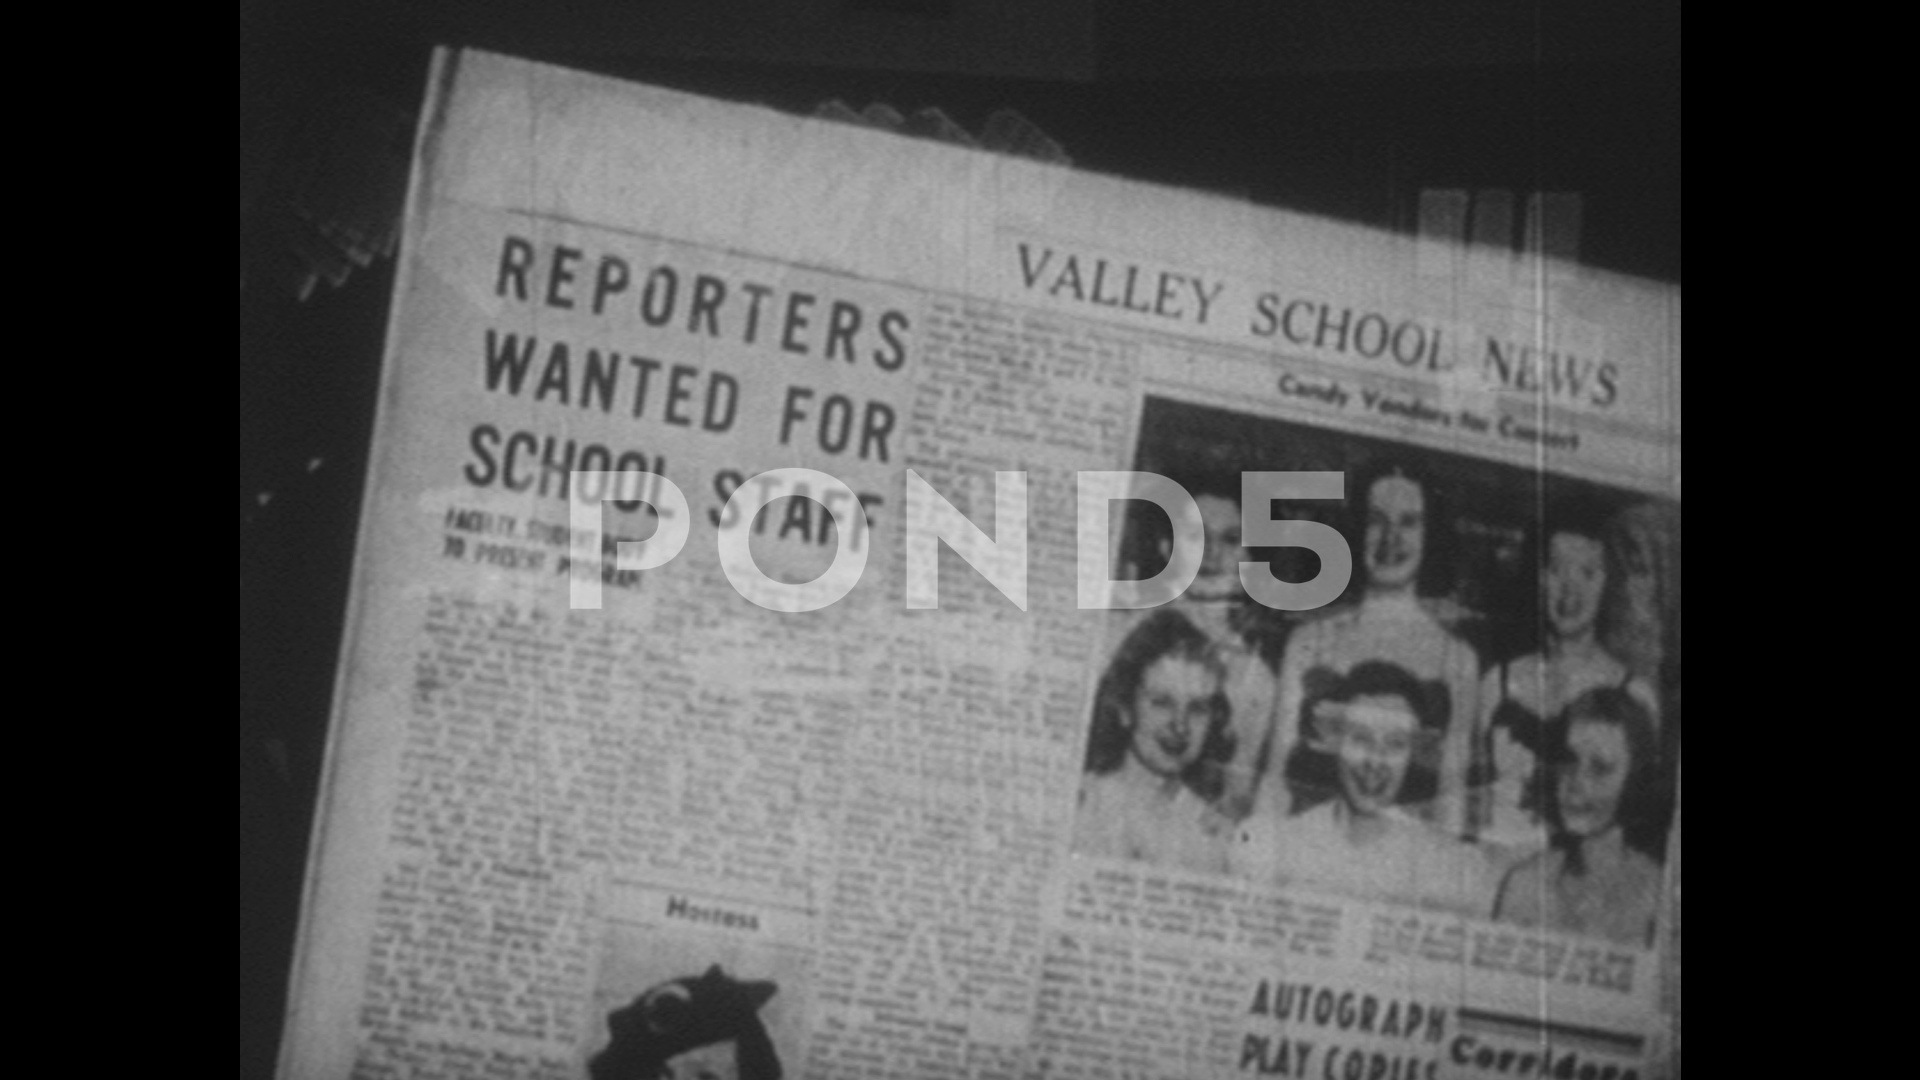 United States 1930s Newspaper Headline Ers Wanted For